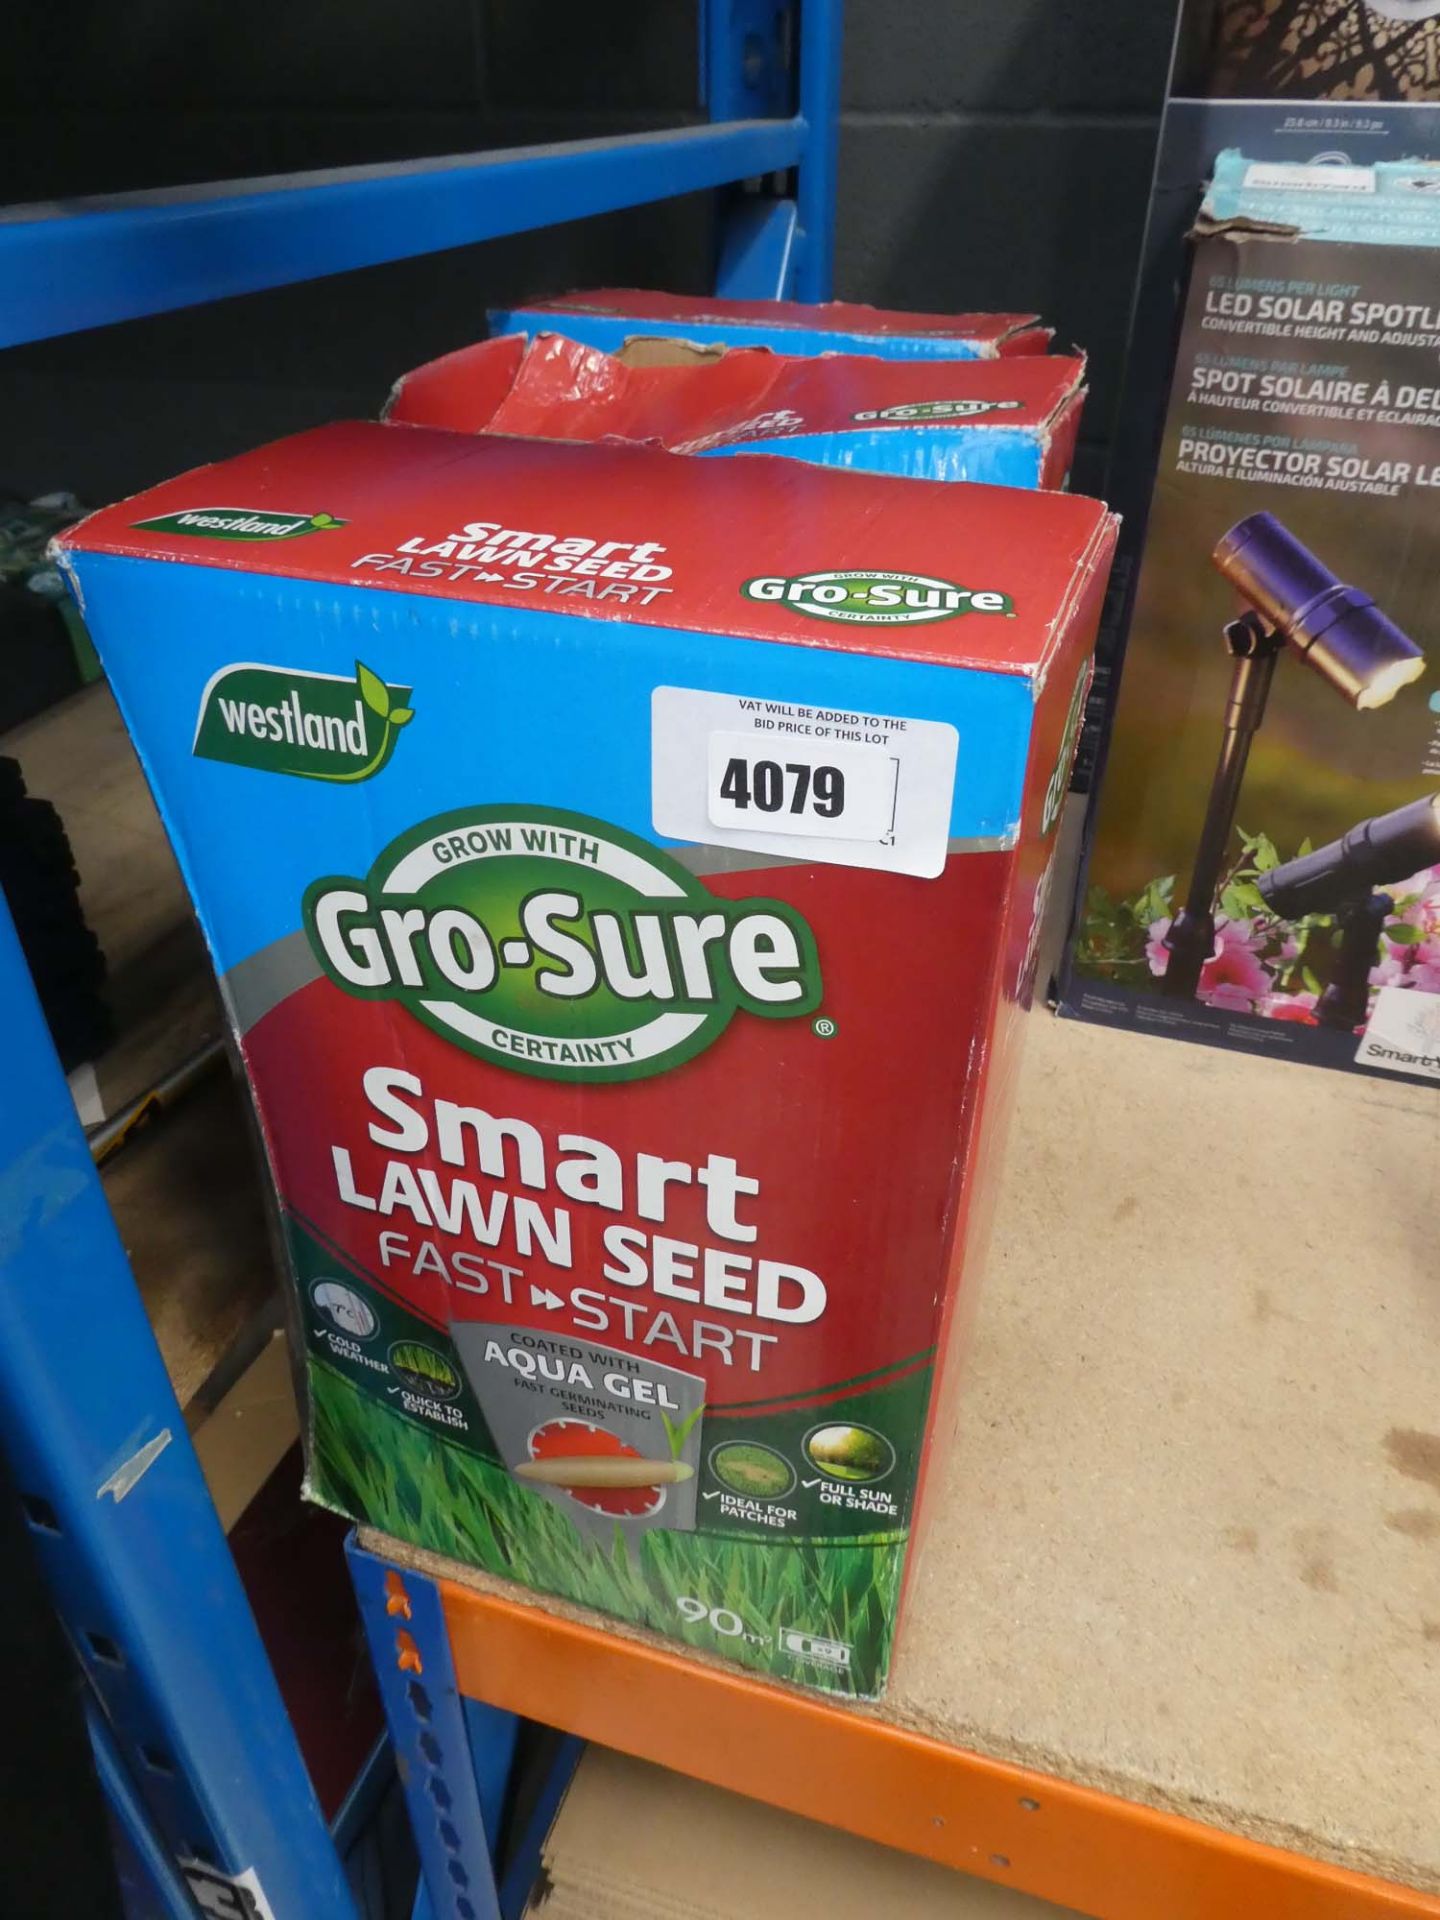 3 boxes of Smart lawn seed